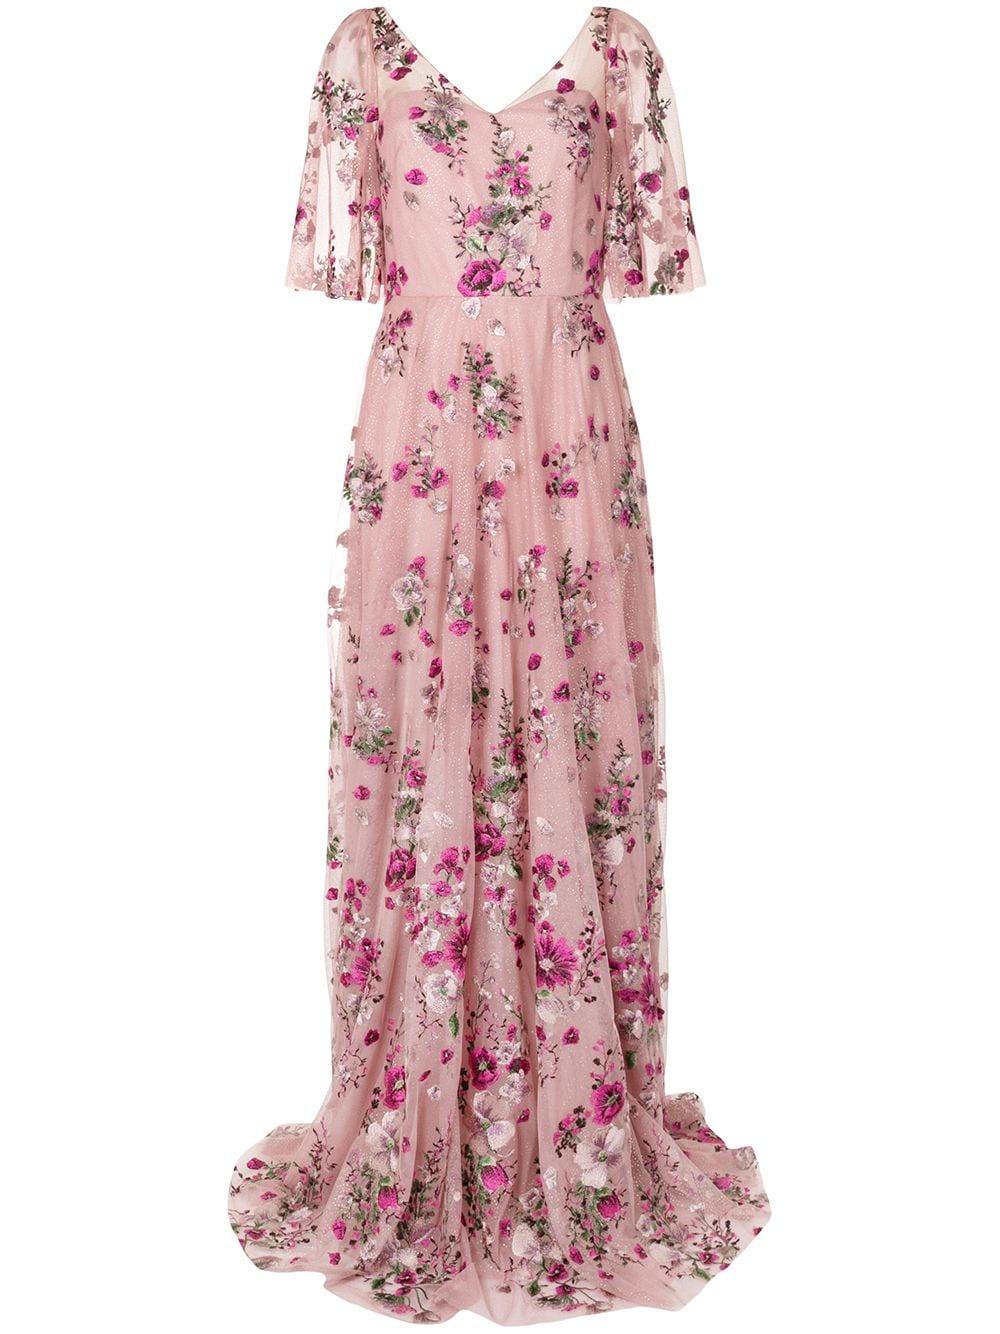 Marchesa notte Floral Embroidered Glitter Tulle Gown in Pink - Lyst